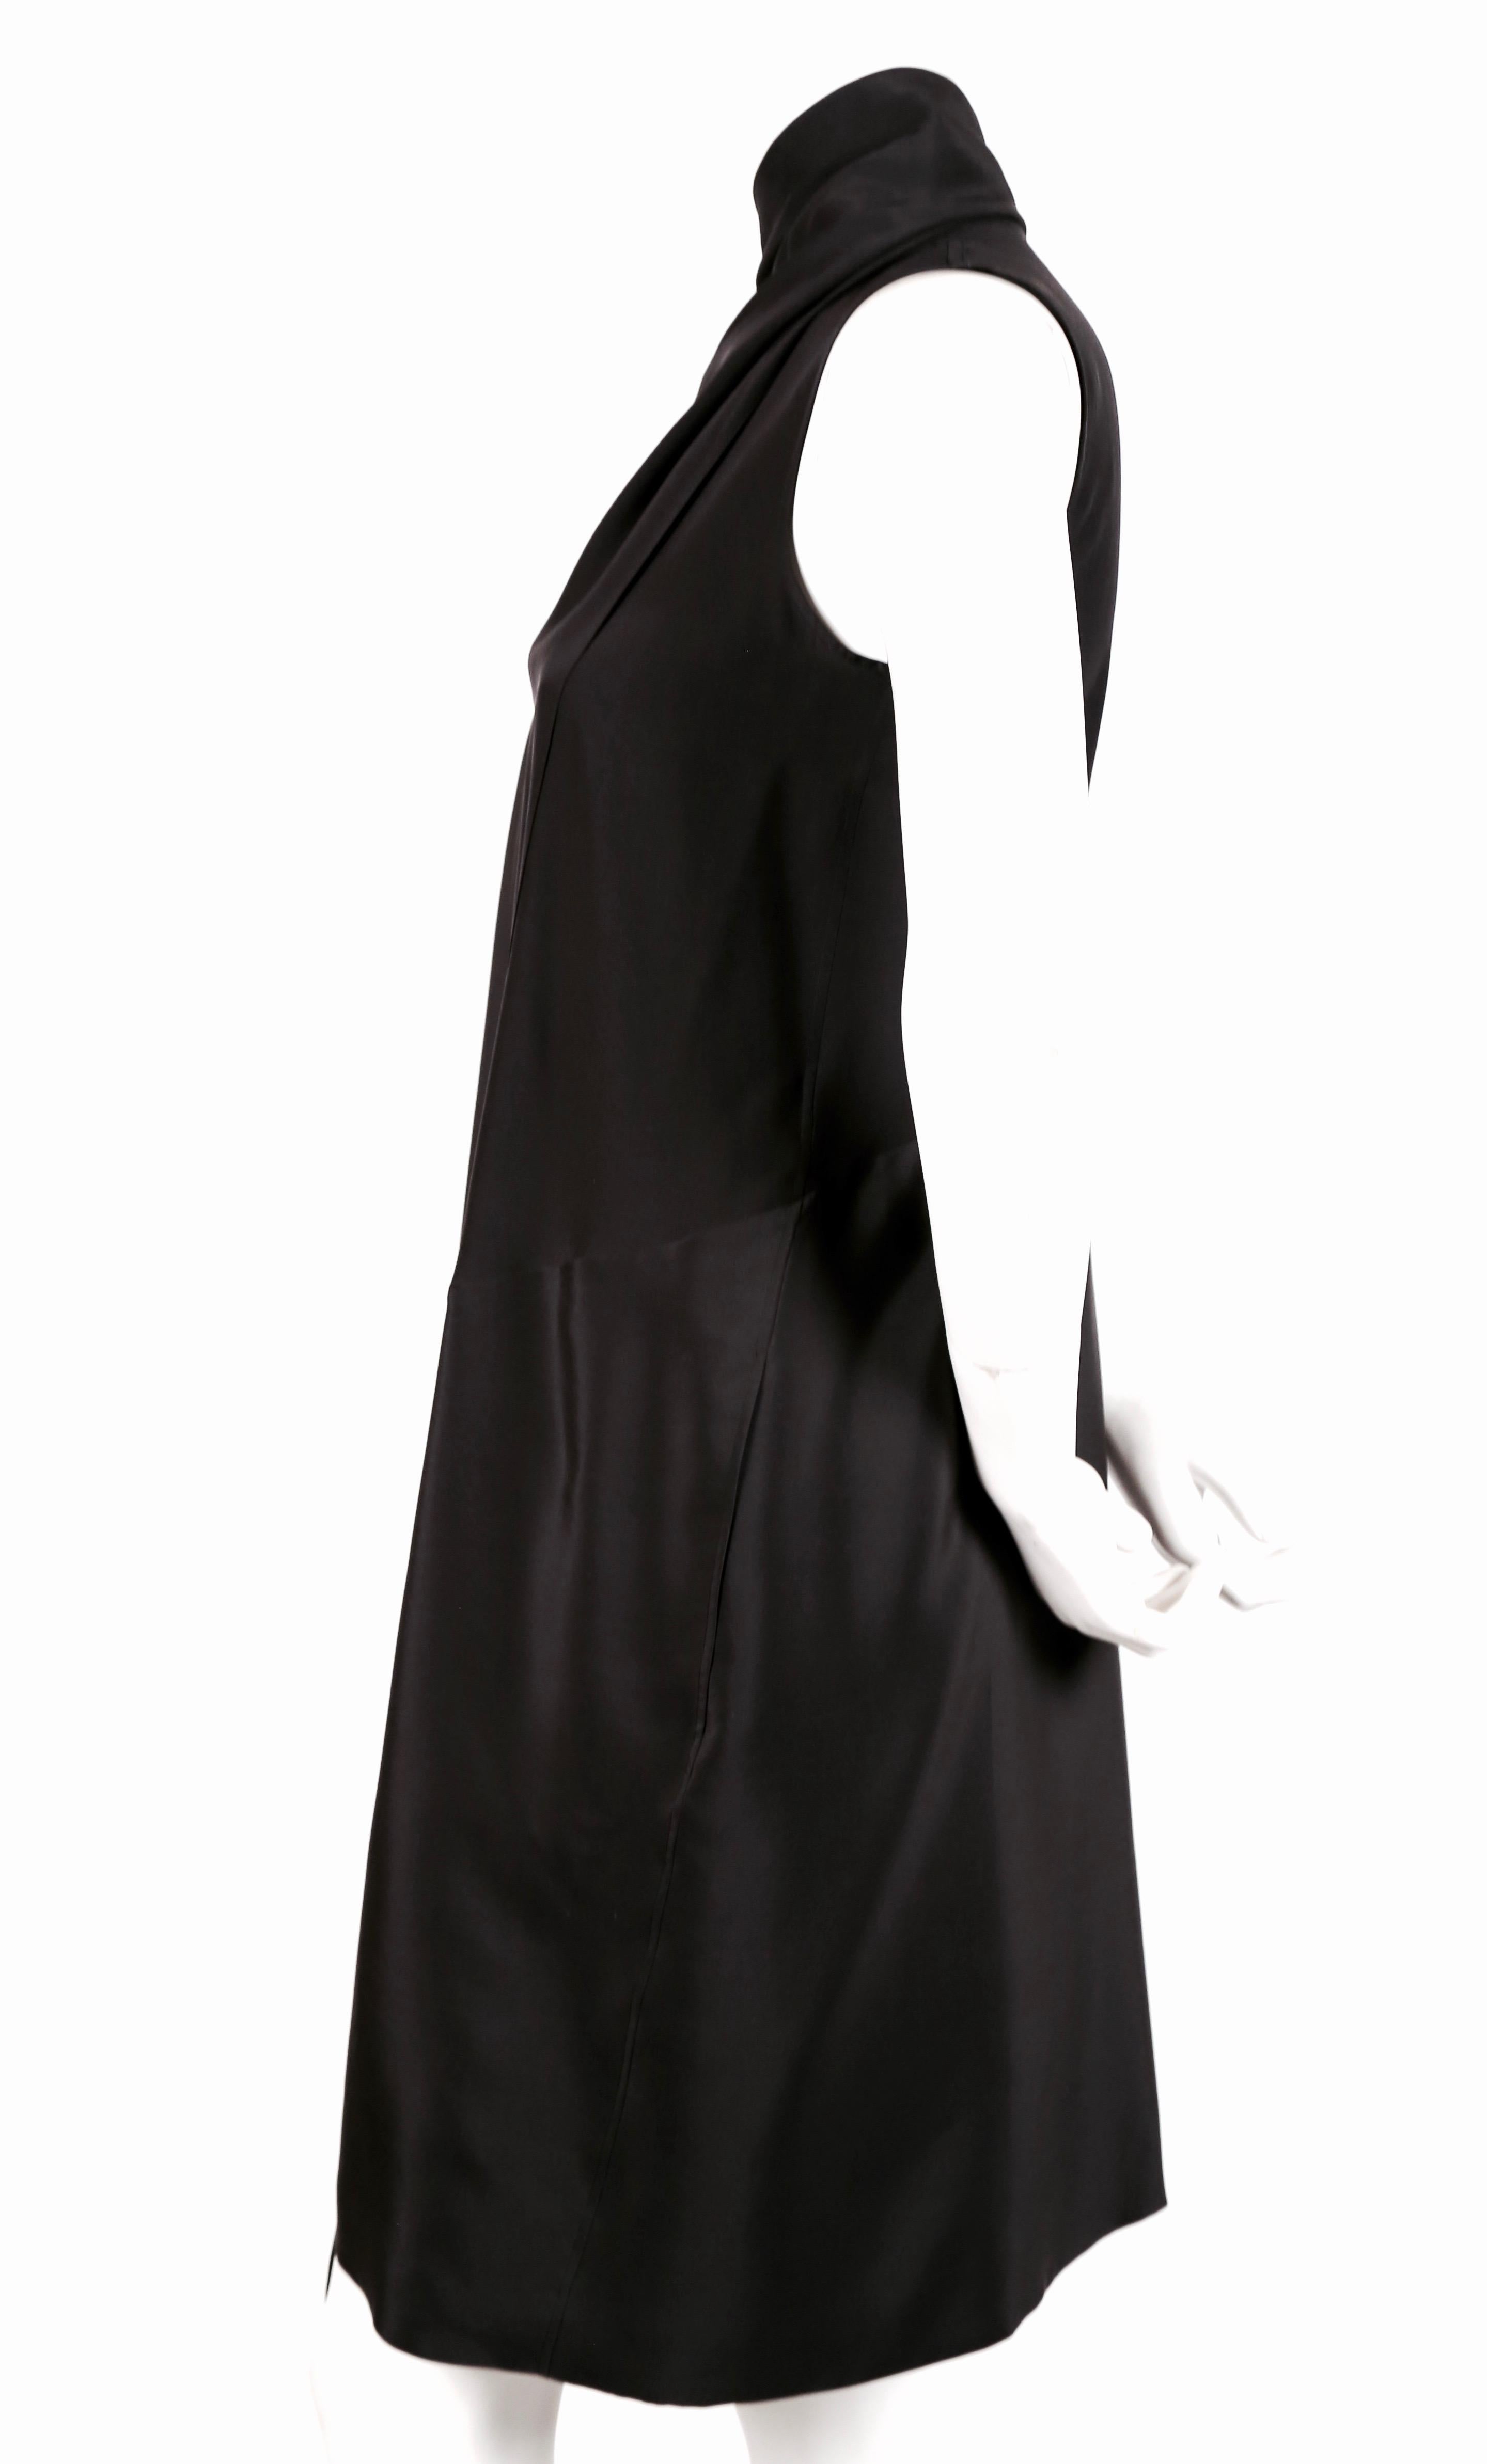 Dark navy blue silk dress with draped wrap scarf neckline designed by Phoebe Philo for her first collection for Celine - Resort 2010. French size 36. Measures approximately: 14